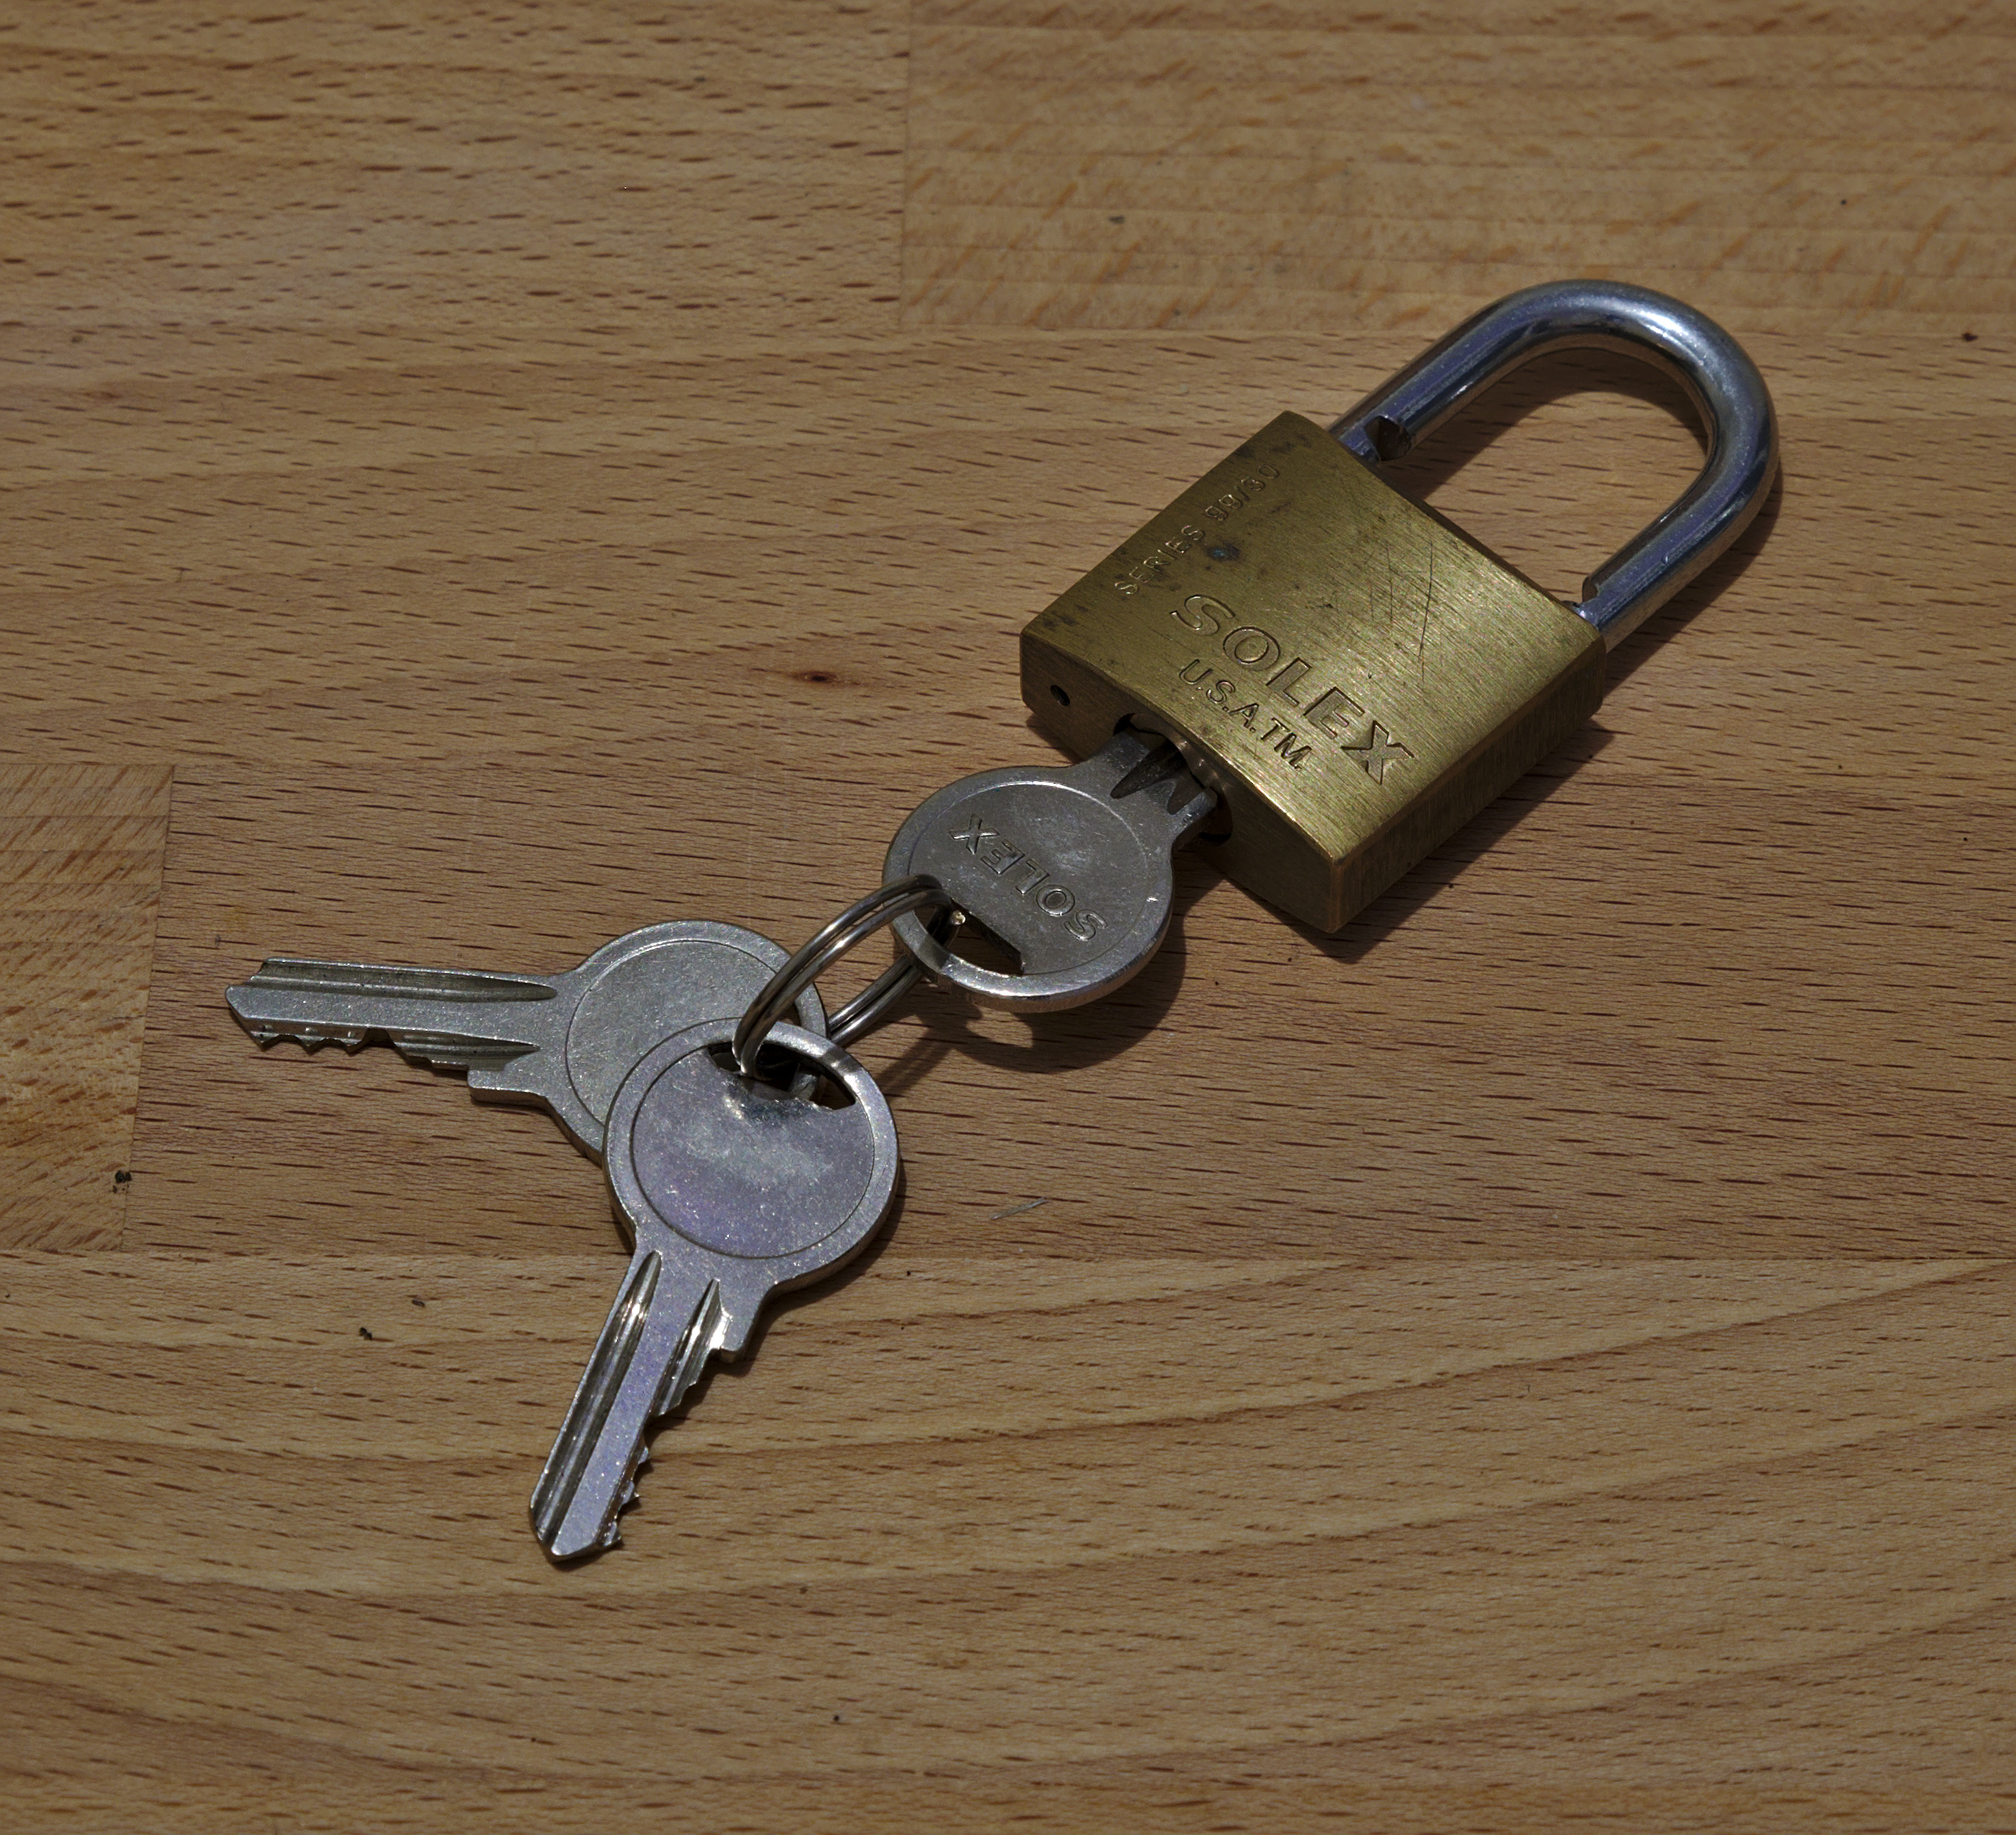 Padlock with an open keyhole